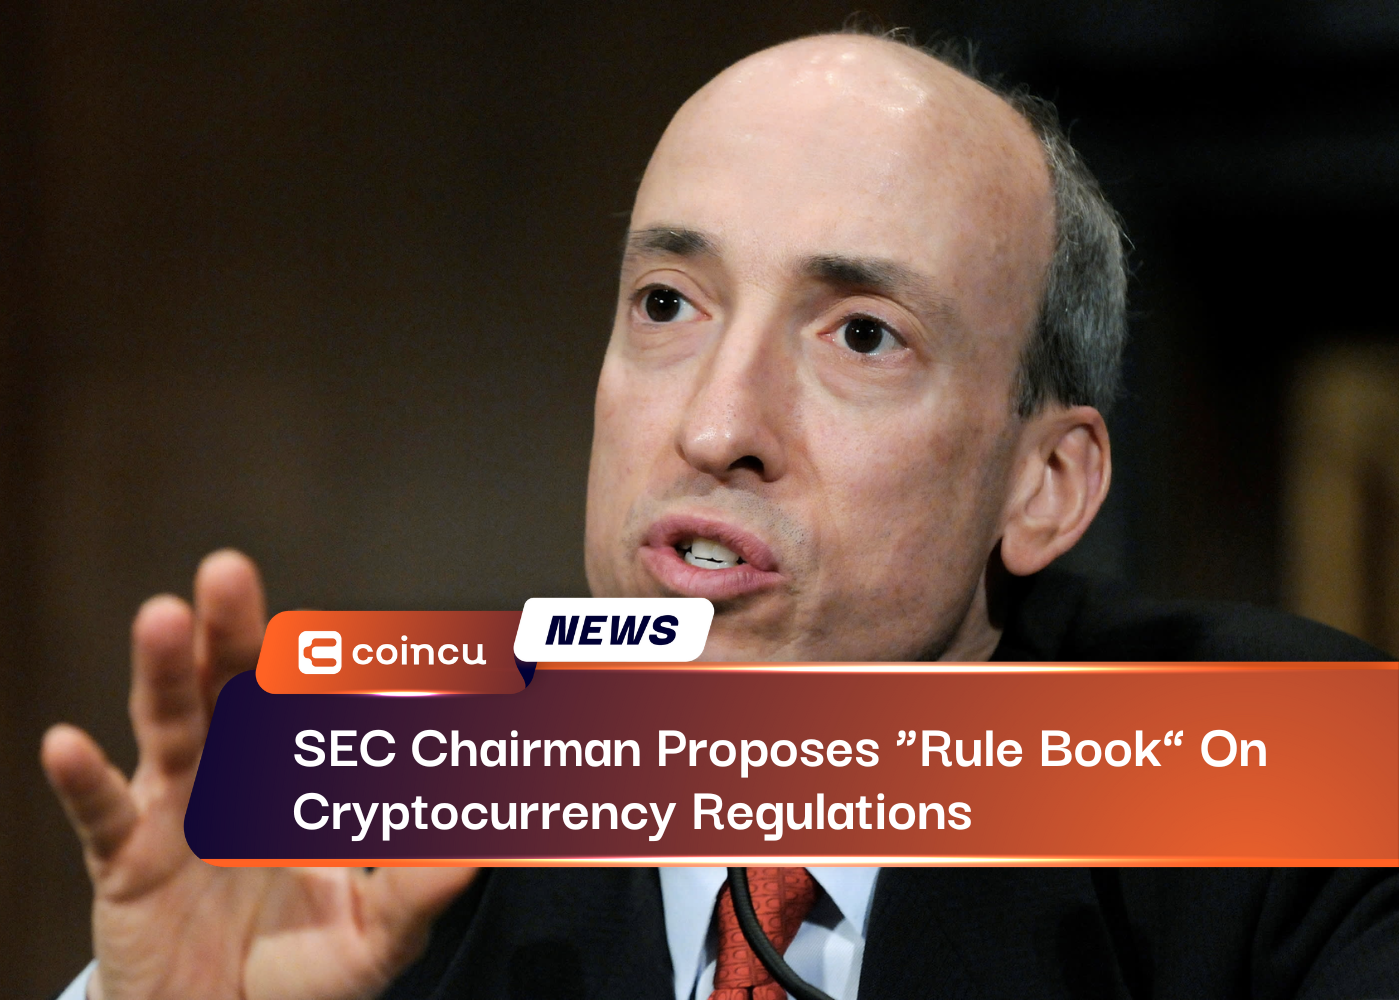 SEC Chairman Proposes “Rule Book” On Cryptocurrency Regulations